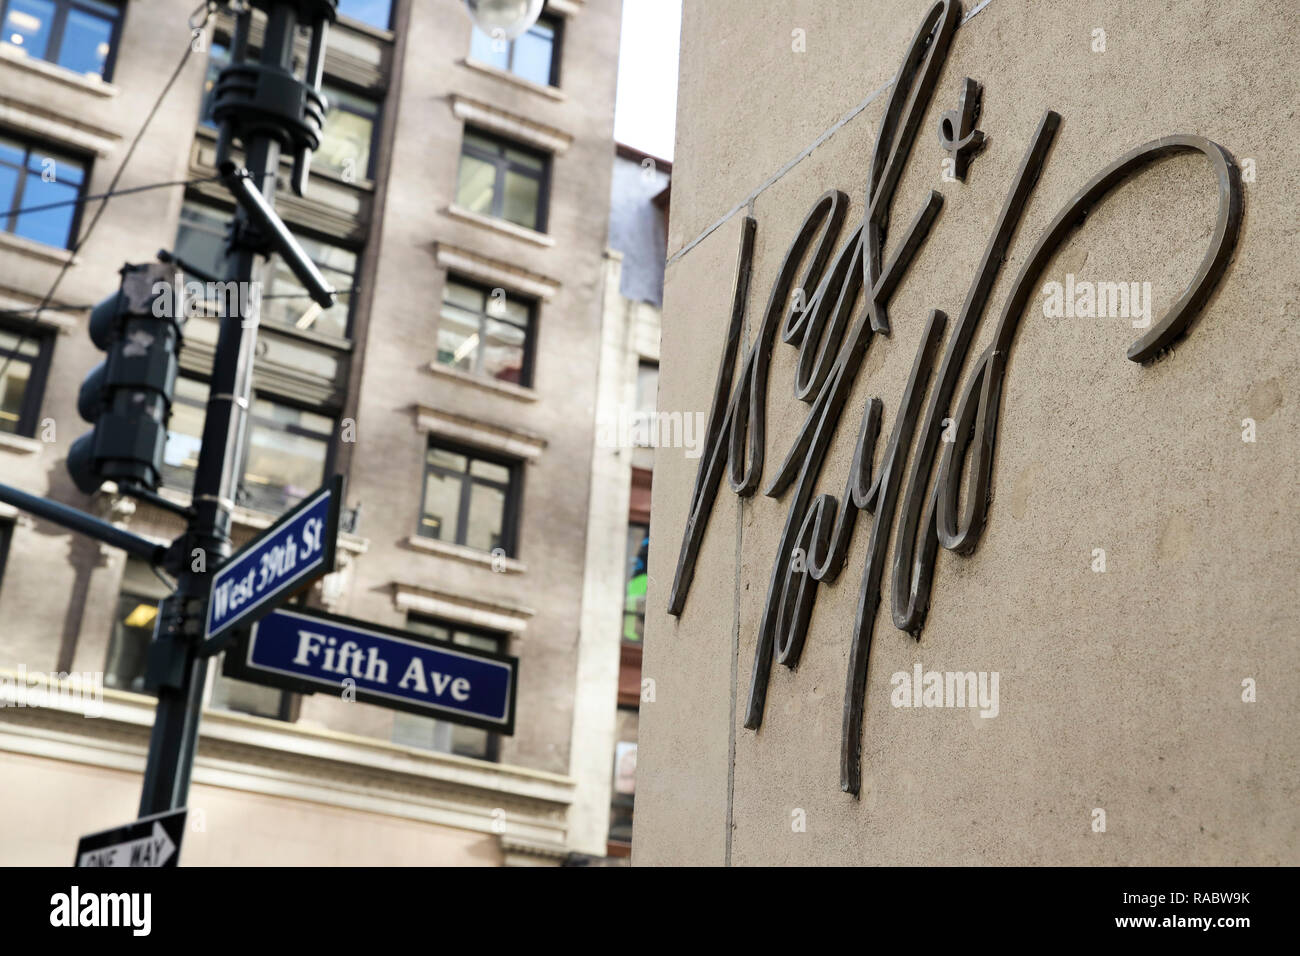 Lord & Taylor closes Manhattan store for good